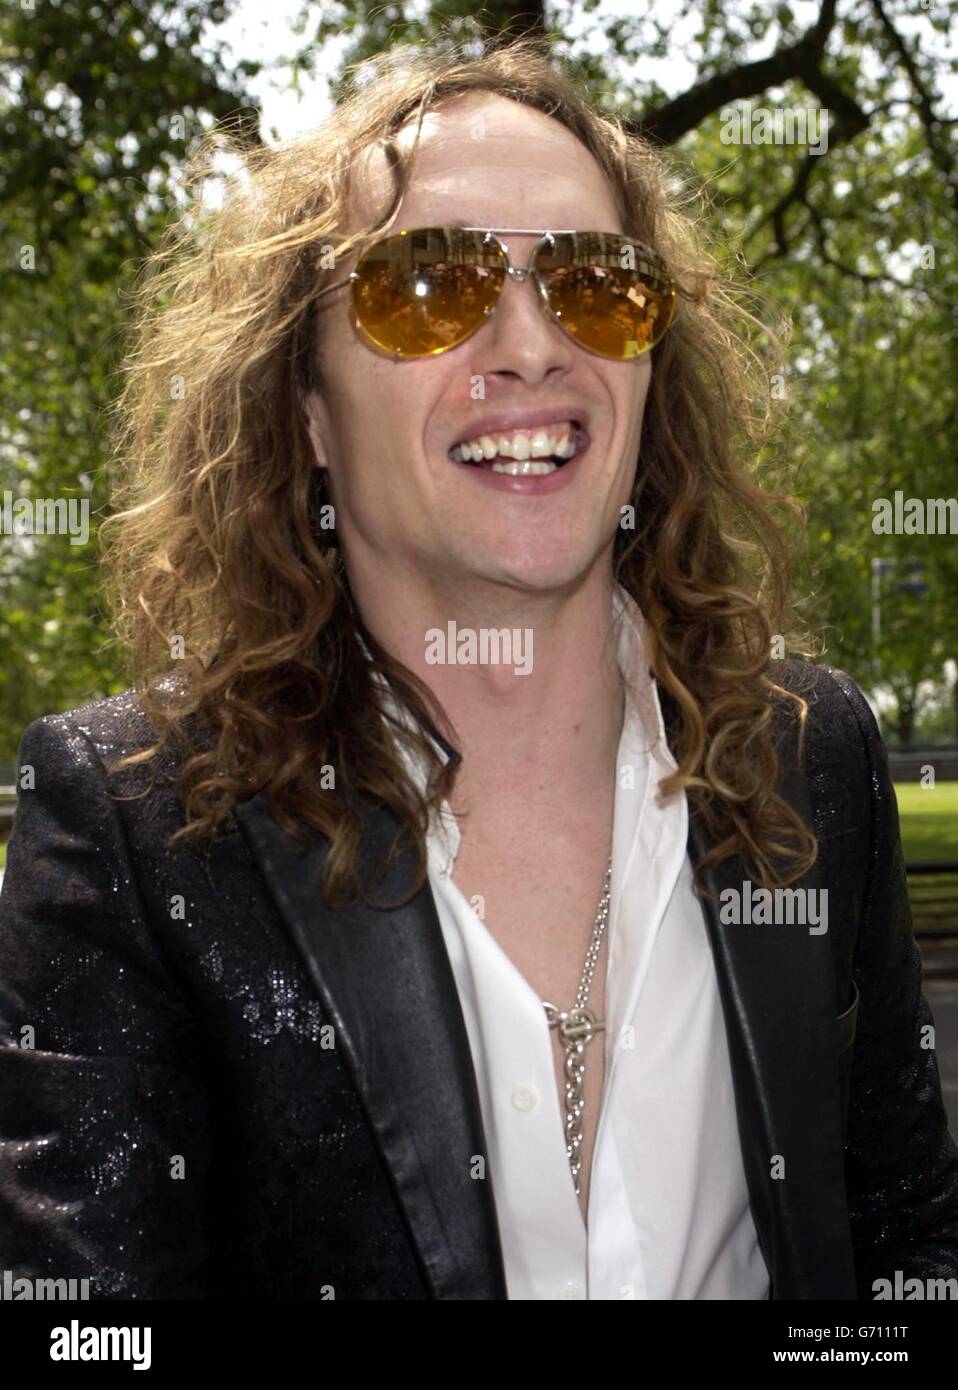 The Darkness frontman Justin Hawkins arrives for the Ivor Novello Awards at the Grosvenor House hotel on Park Lane in central London. The 49th annual awards honour the best songs and film scores of 2003. Stock Photo